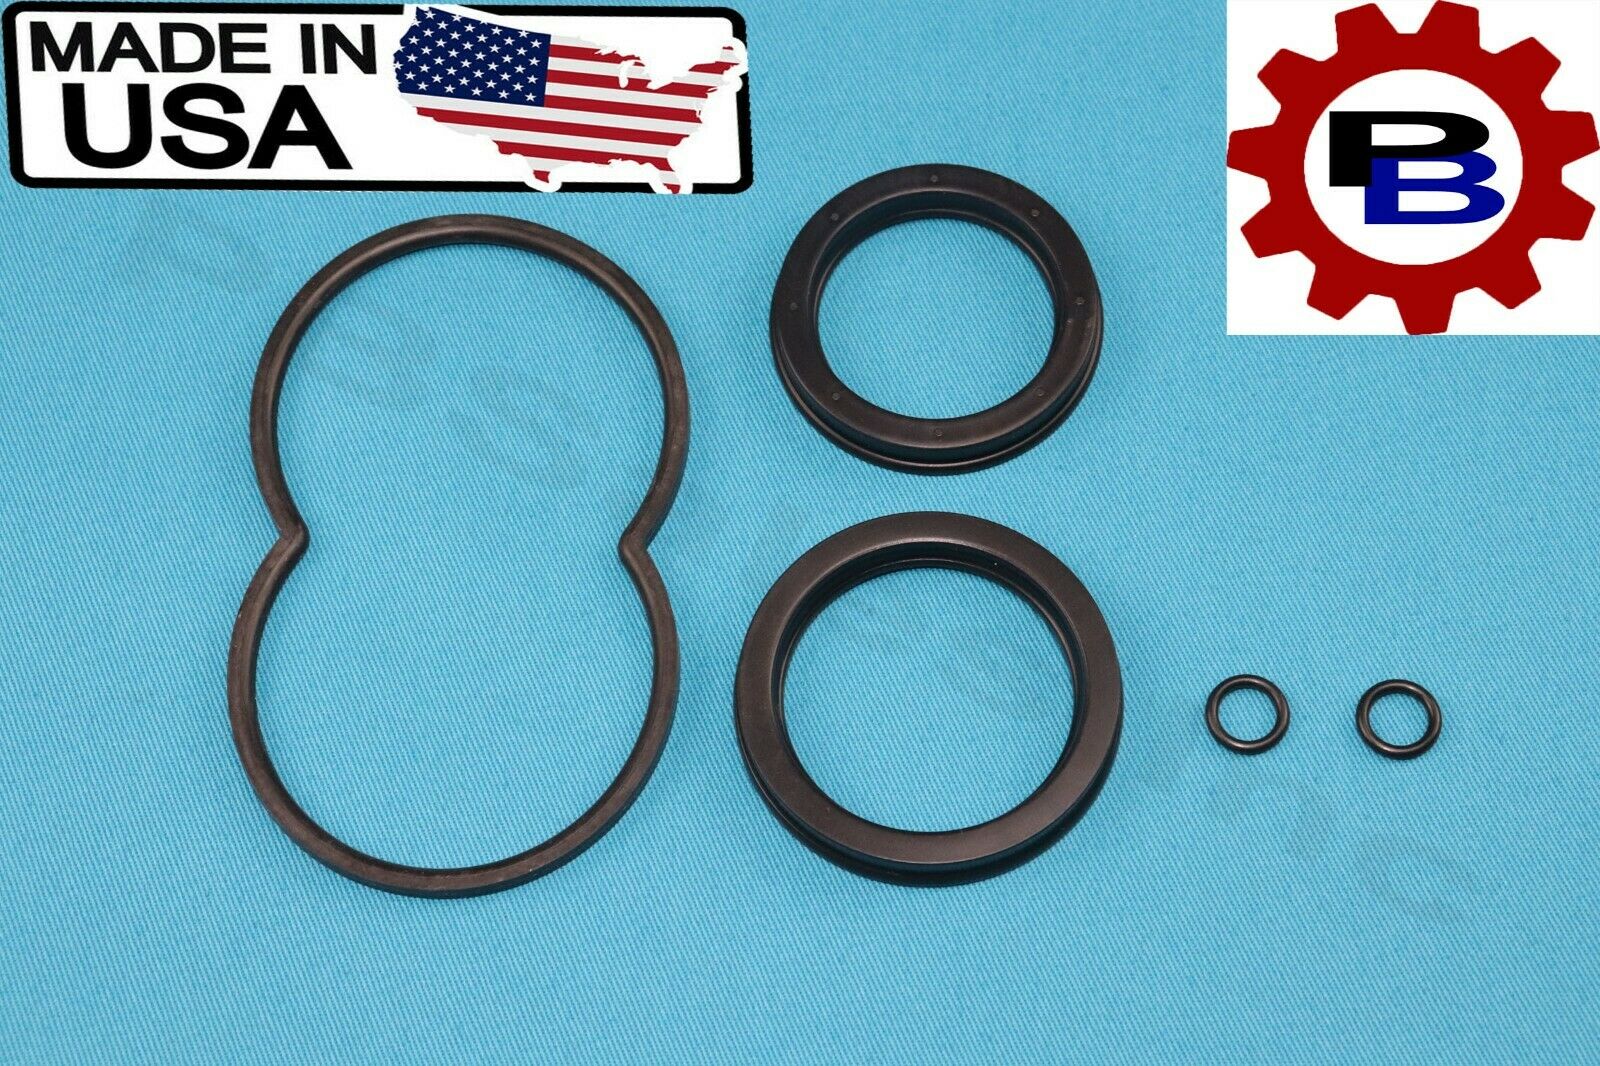 Hydro-boost 5 Piece Seal Kit For Chevy Gmc Ford Chrysler Dodge Made In U.s.a